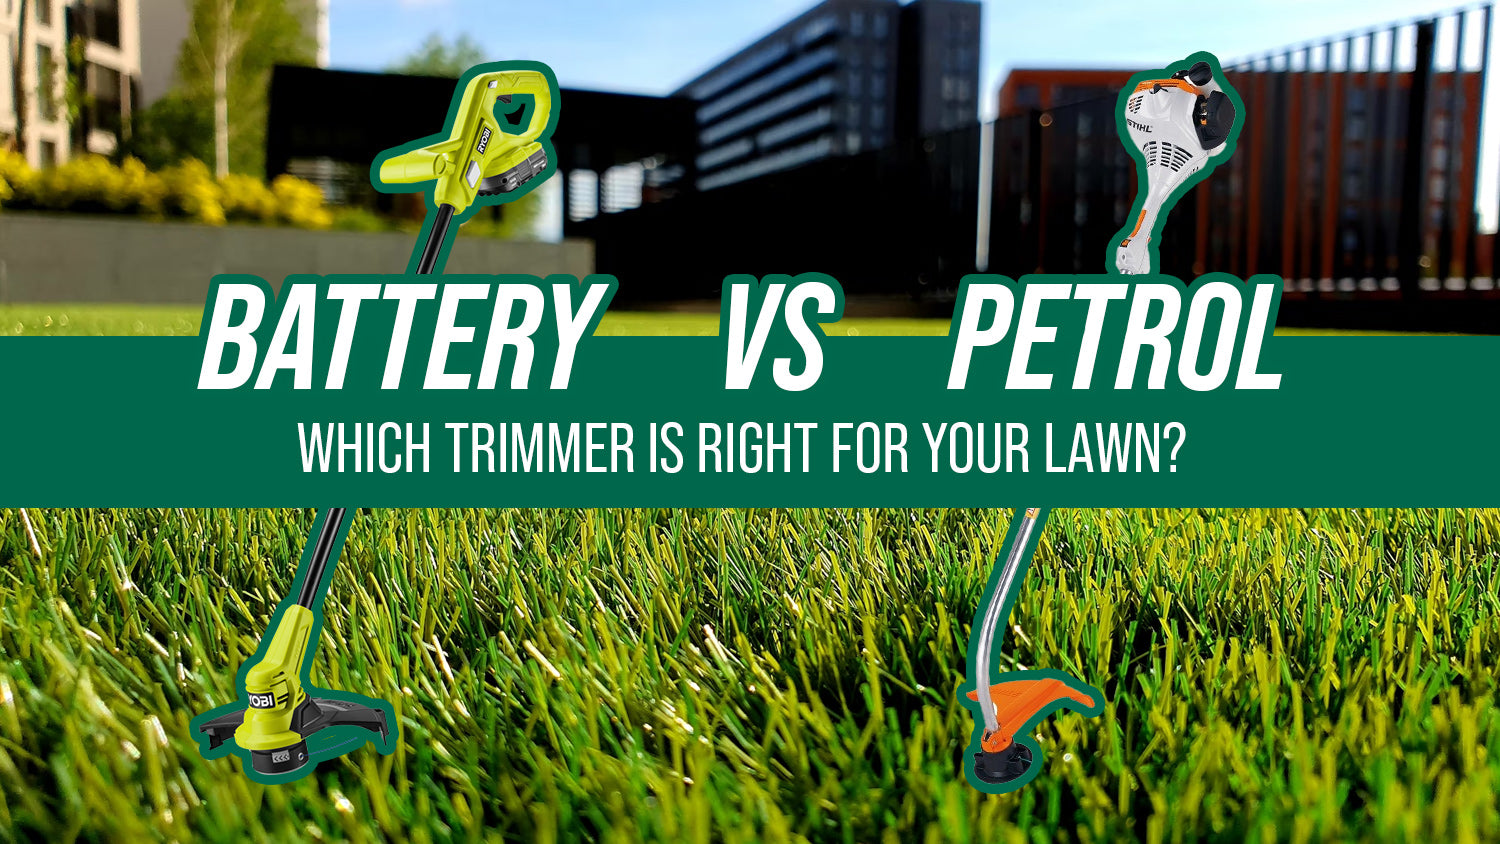 Battery vs. Petrol Trimmers: Which One is Right for Your Lawn?